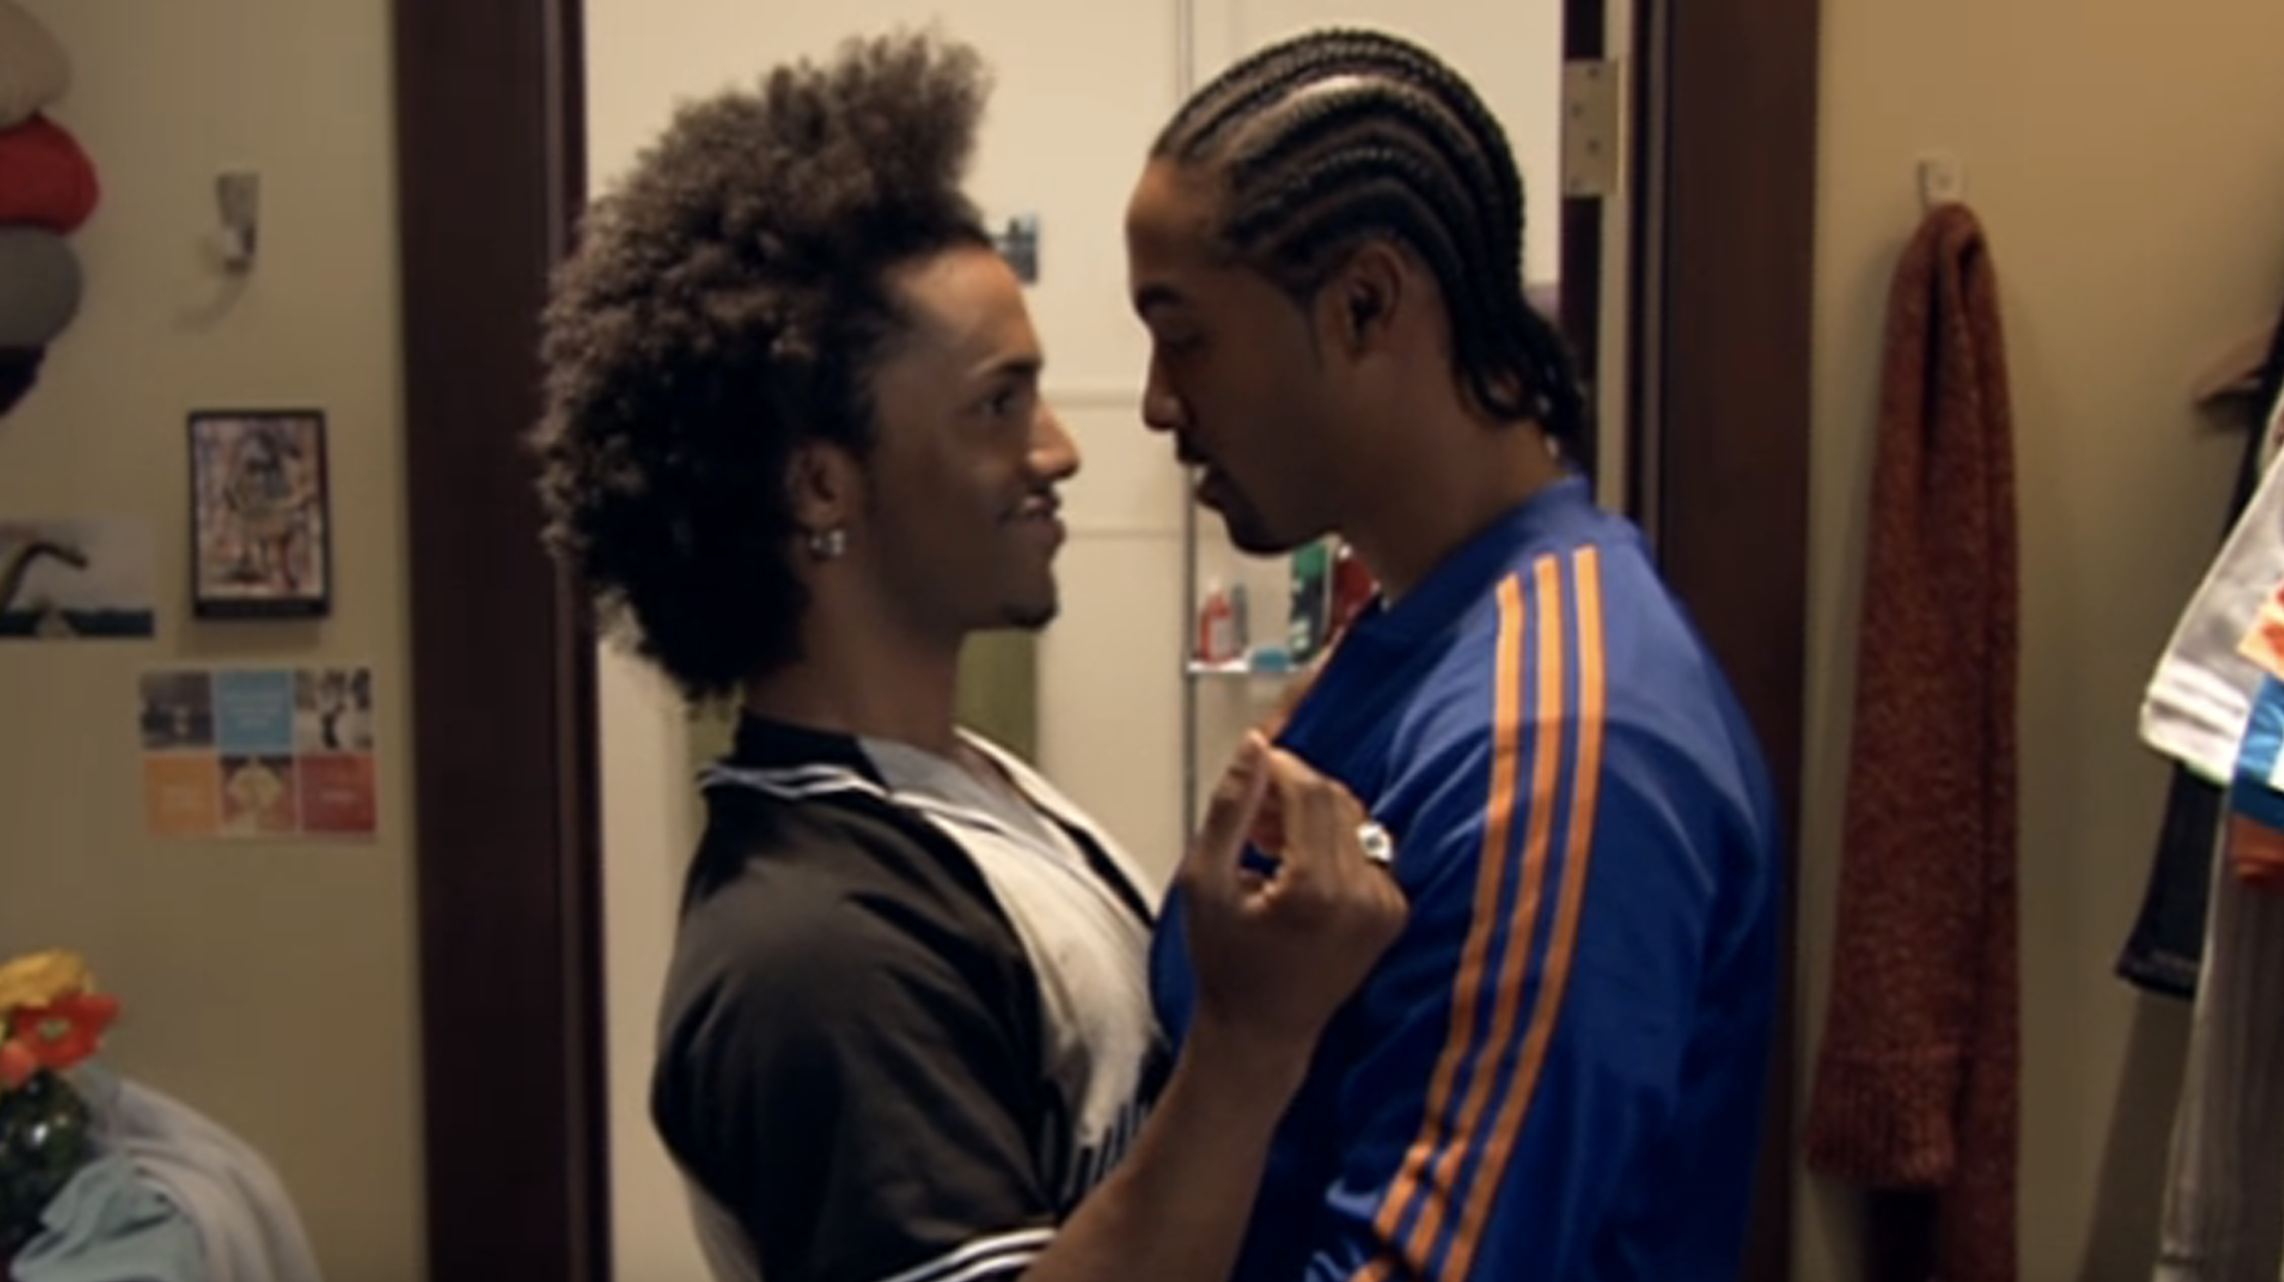 Darryl, as Noah, portrays a moment of close interaction with his male love interest